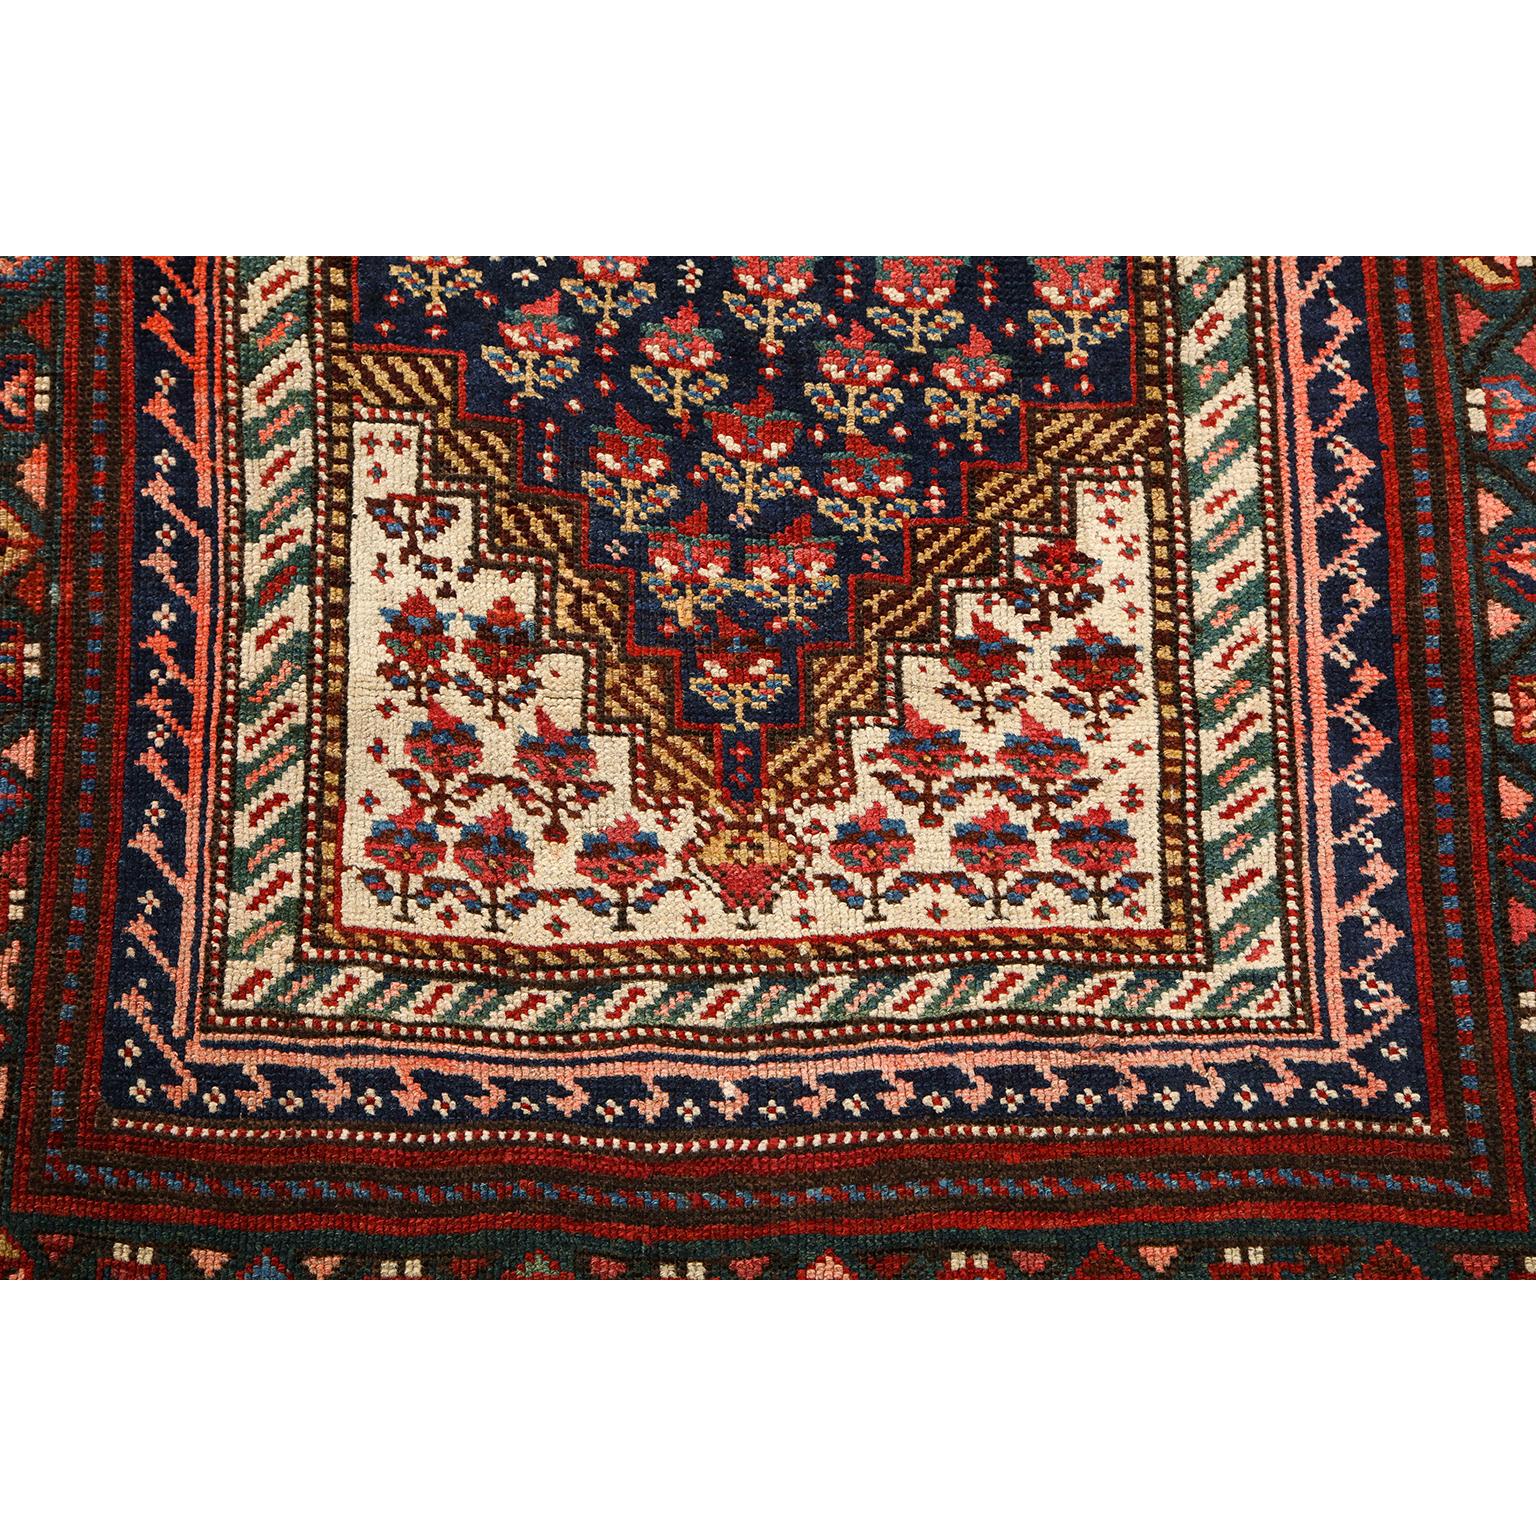 Antique 1900s Wool Persian Senneh Rug, 5' x 9' In Good Condition For Sale In New York, NY